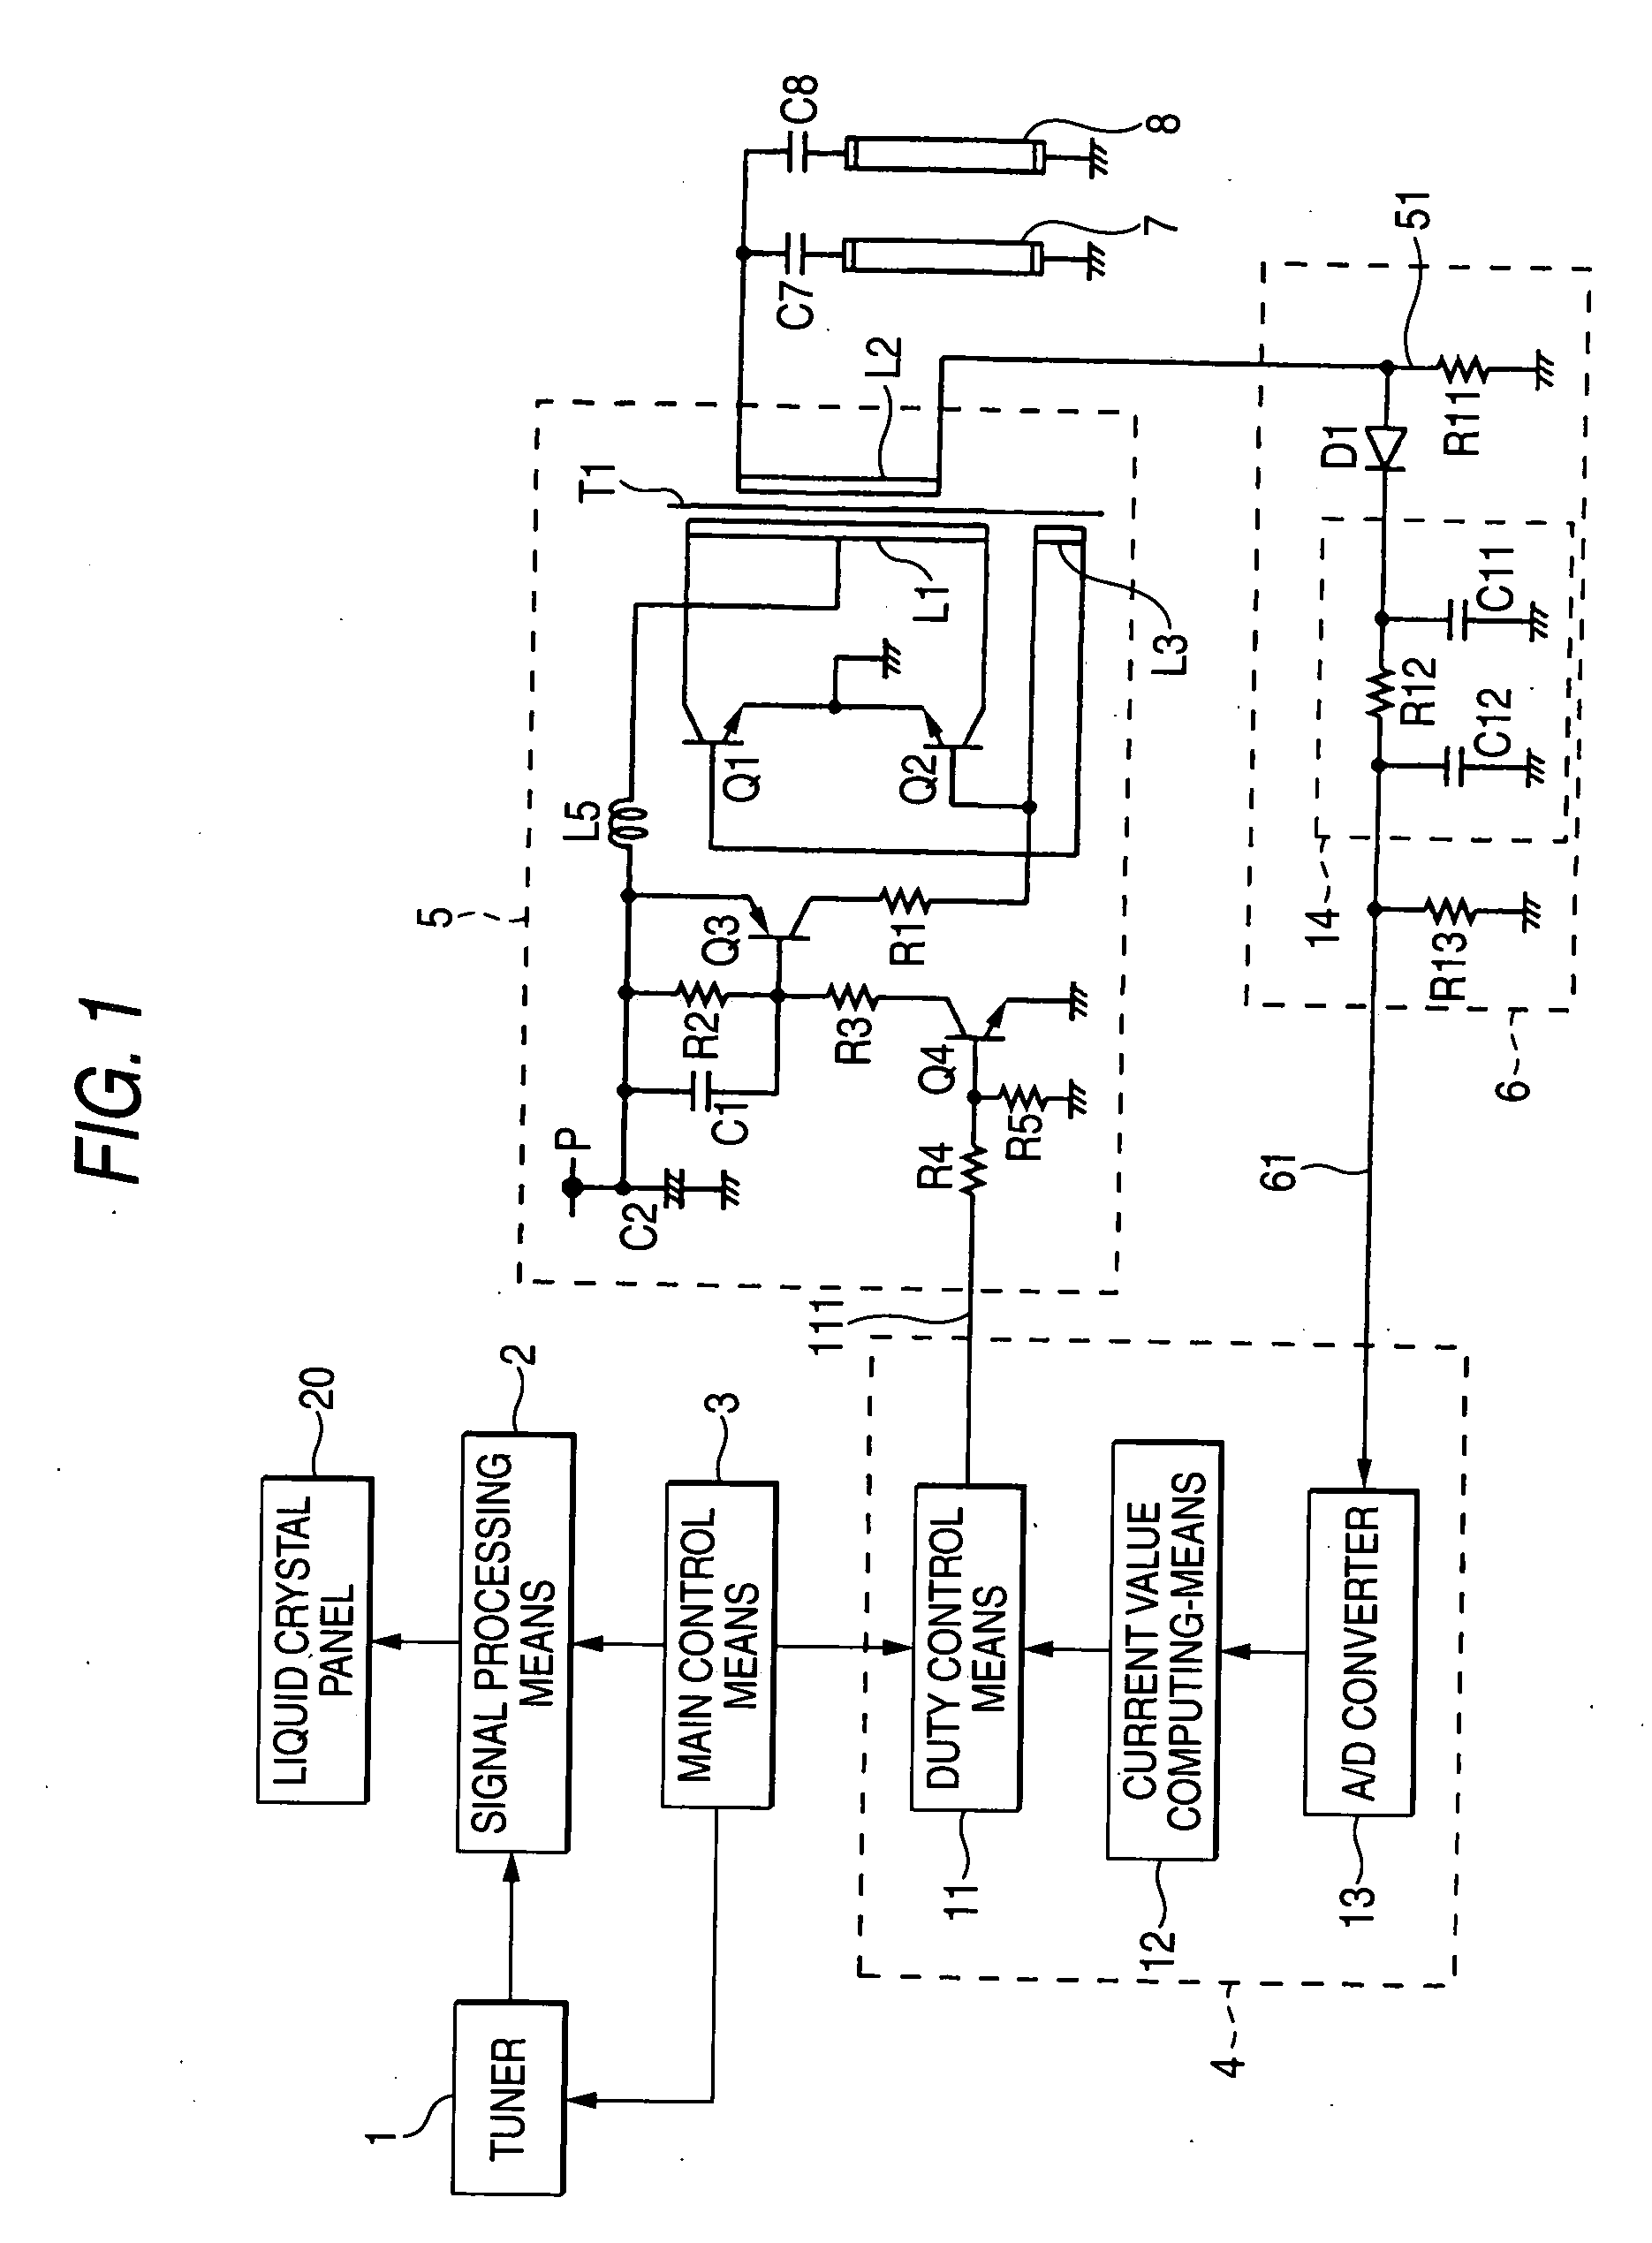 Television receiver and cold-cathode tube dimmer